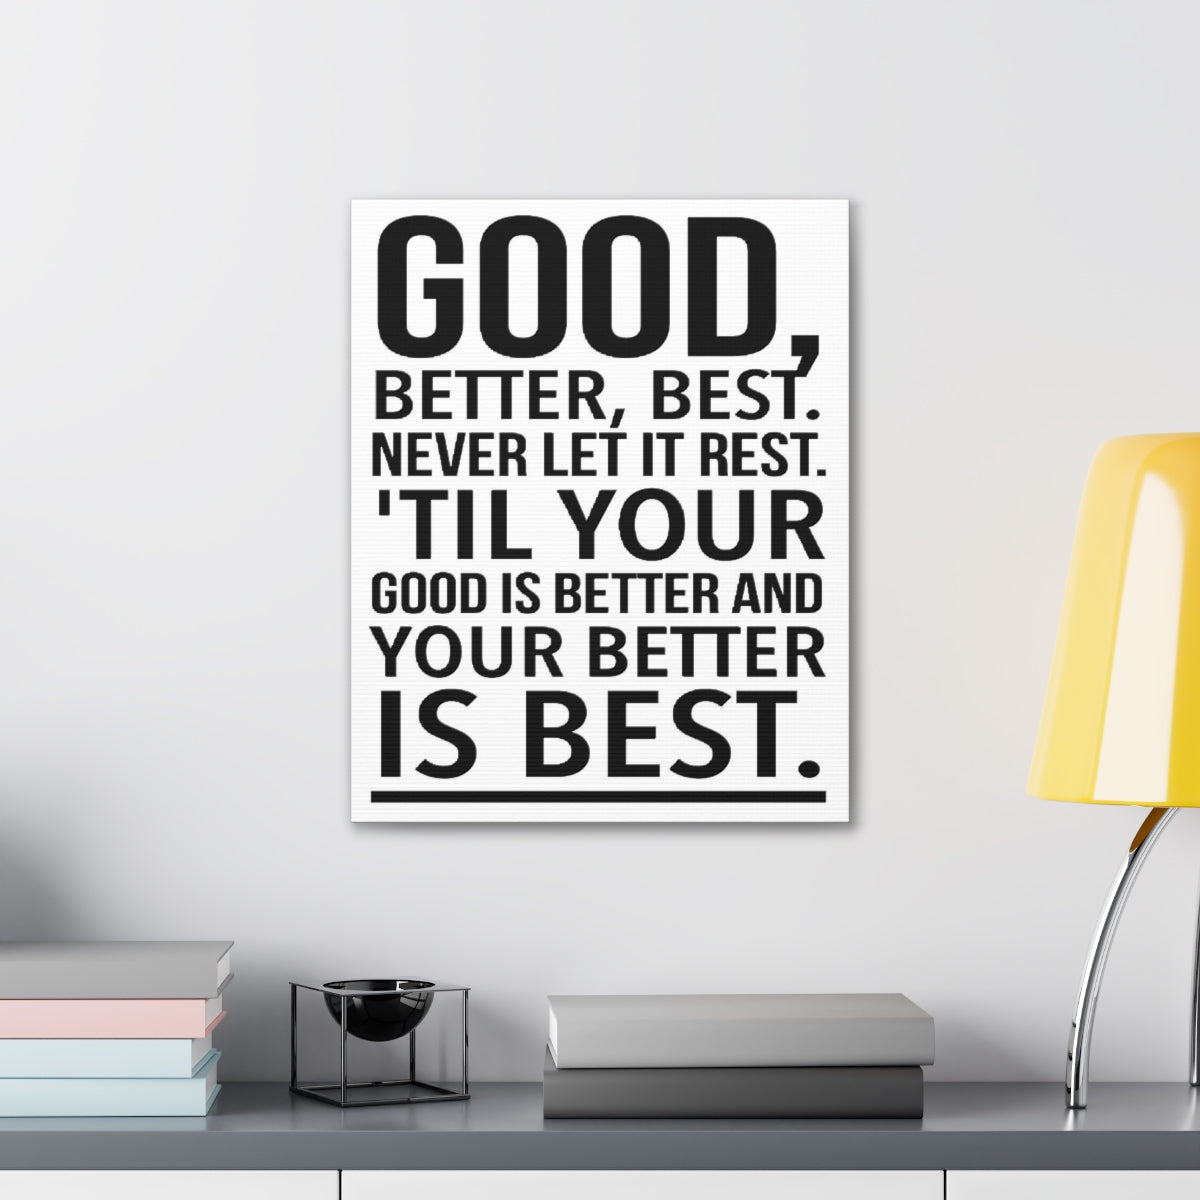 Scripture Walls Inspirational Wall Art Good Better Best Motivation Wall Decor for Home Office Gym Inspiring Success Quote Print Ready to Hang Unframed-Express Your Love Gifts